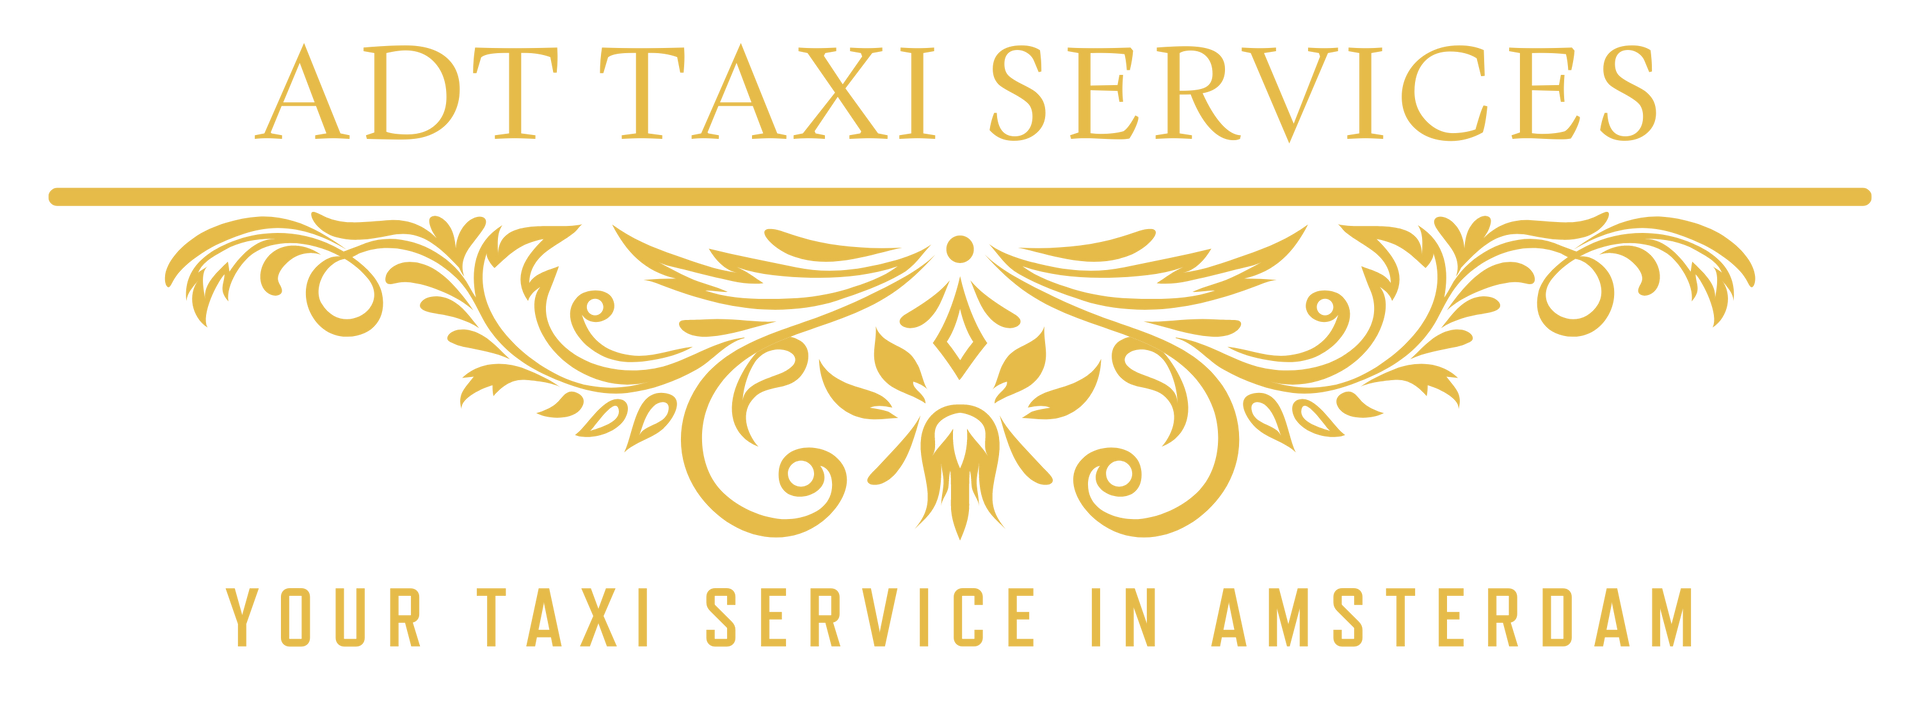 ADT Taxi Amsterdam Taxi Service Amsterdam